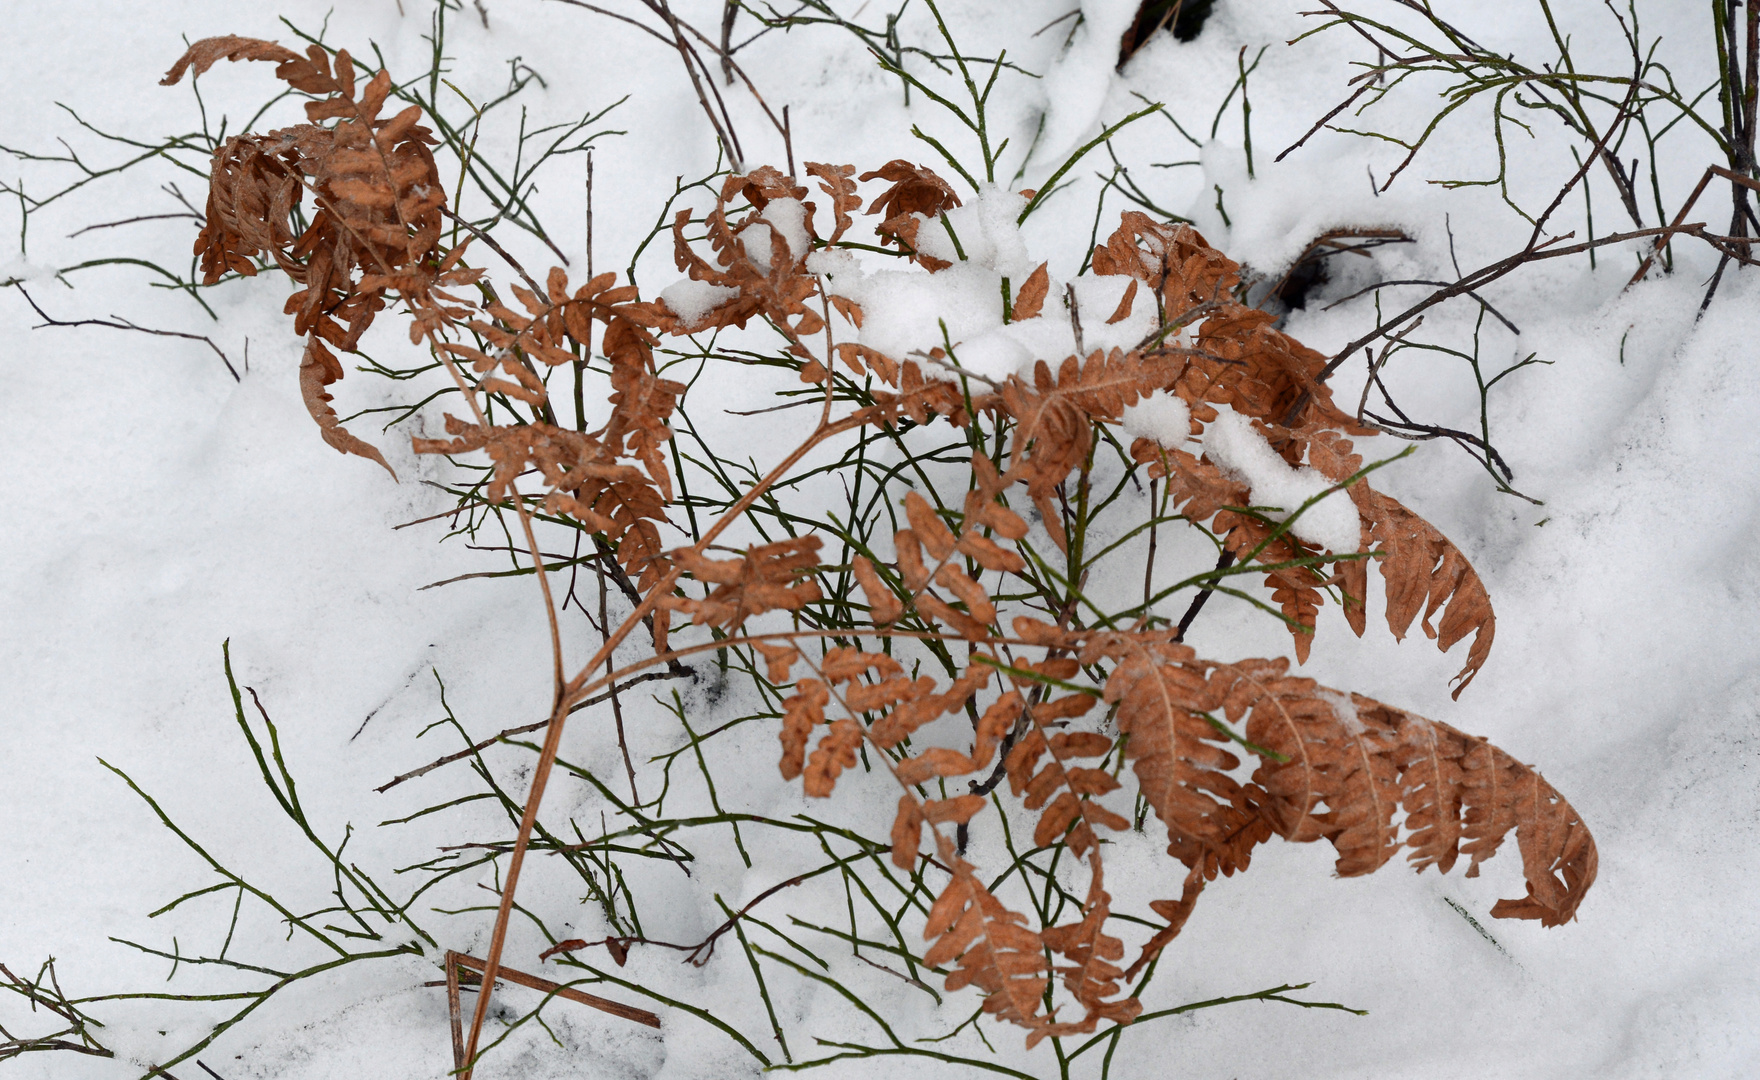 The fern and bilberry on snow